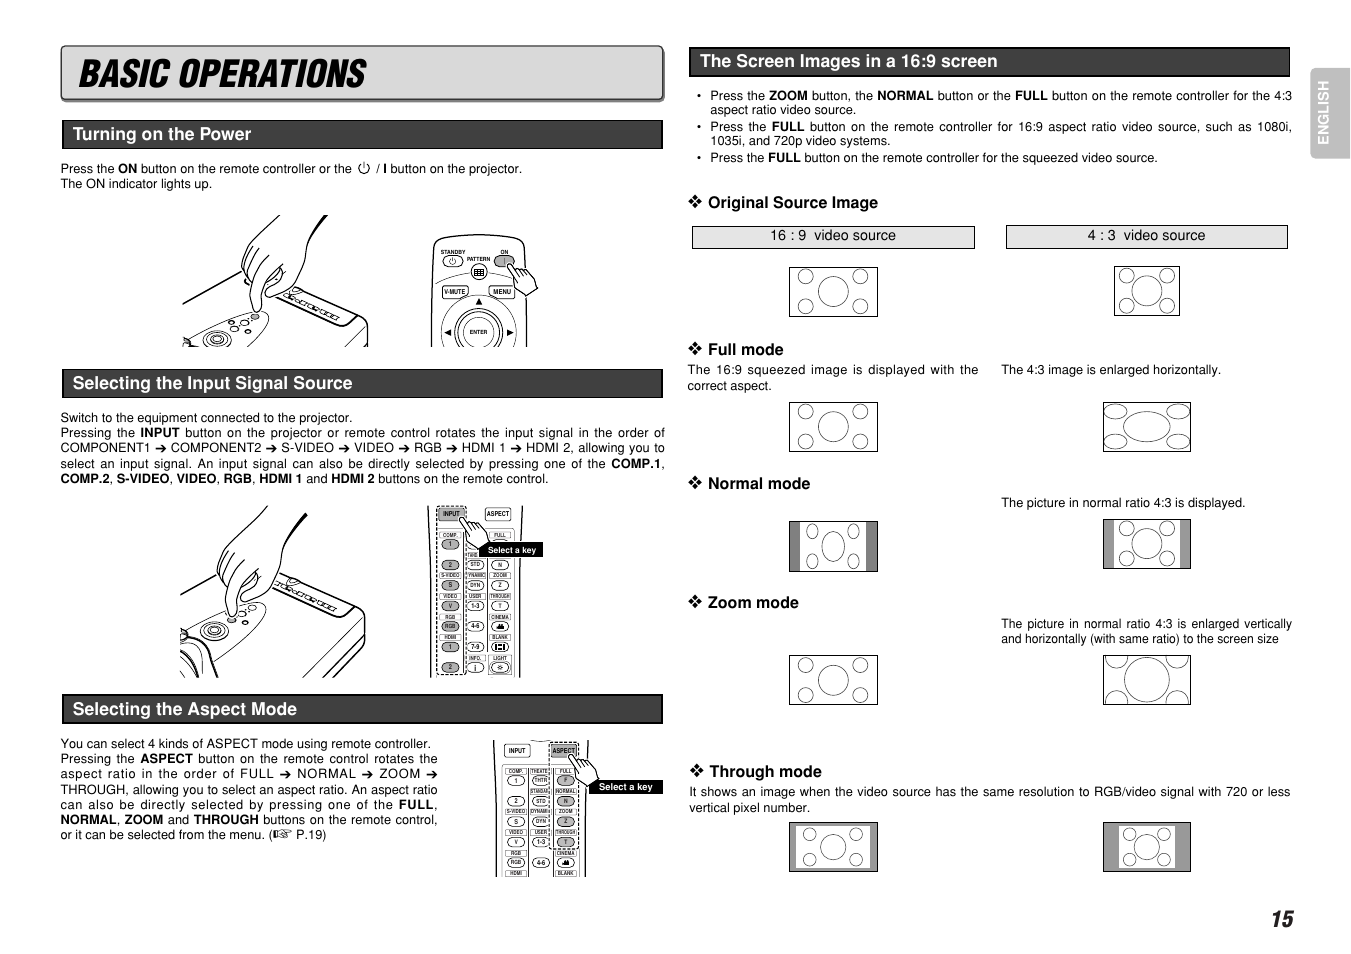 Basic operations, Selecting the aspect mode, Selecting the input signal source | Turning on the power, The screen images in a 16:9 screen, Original source image, Full mode, Normal mode, Zoom mode, Through mode | Marantz VP-12S4 User Manual | Page 21 / 37